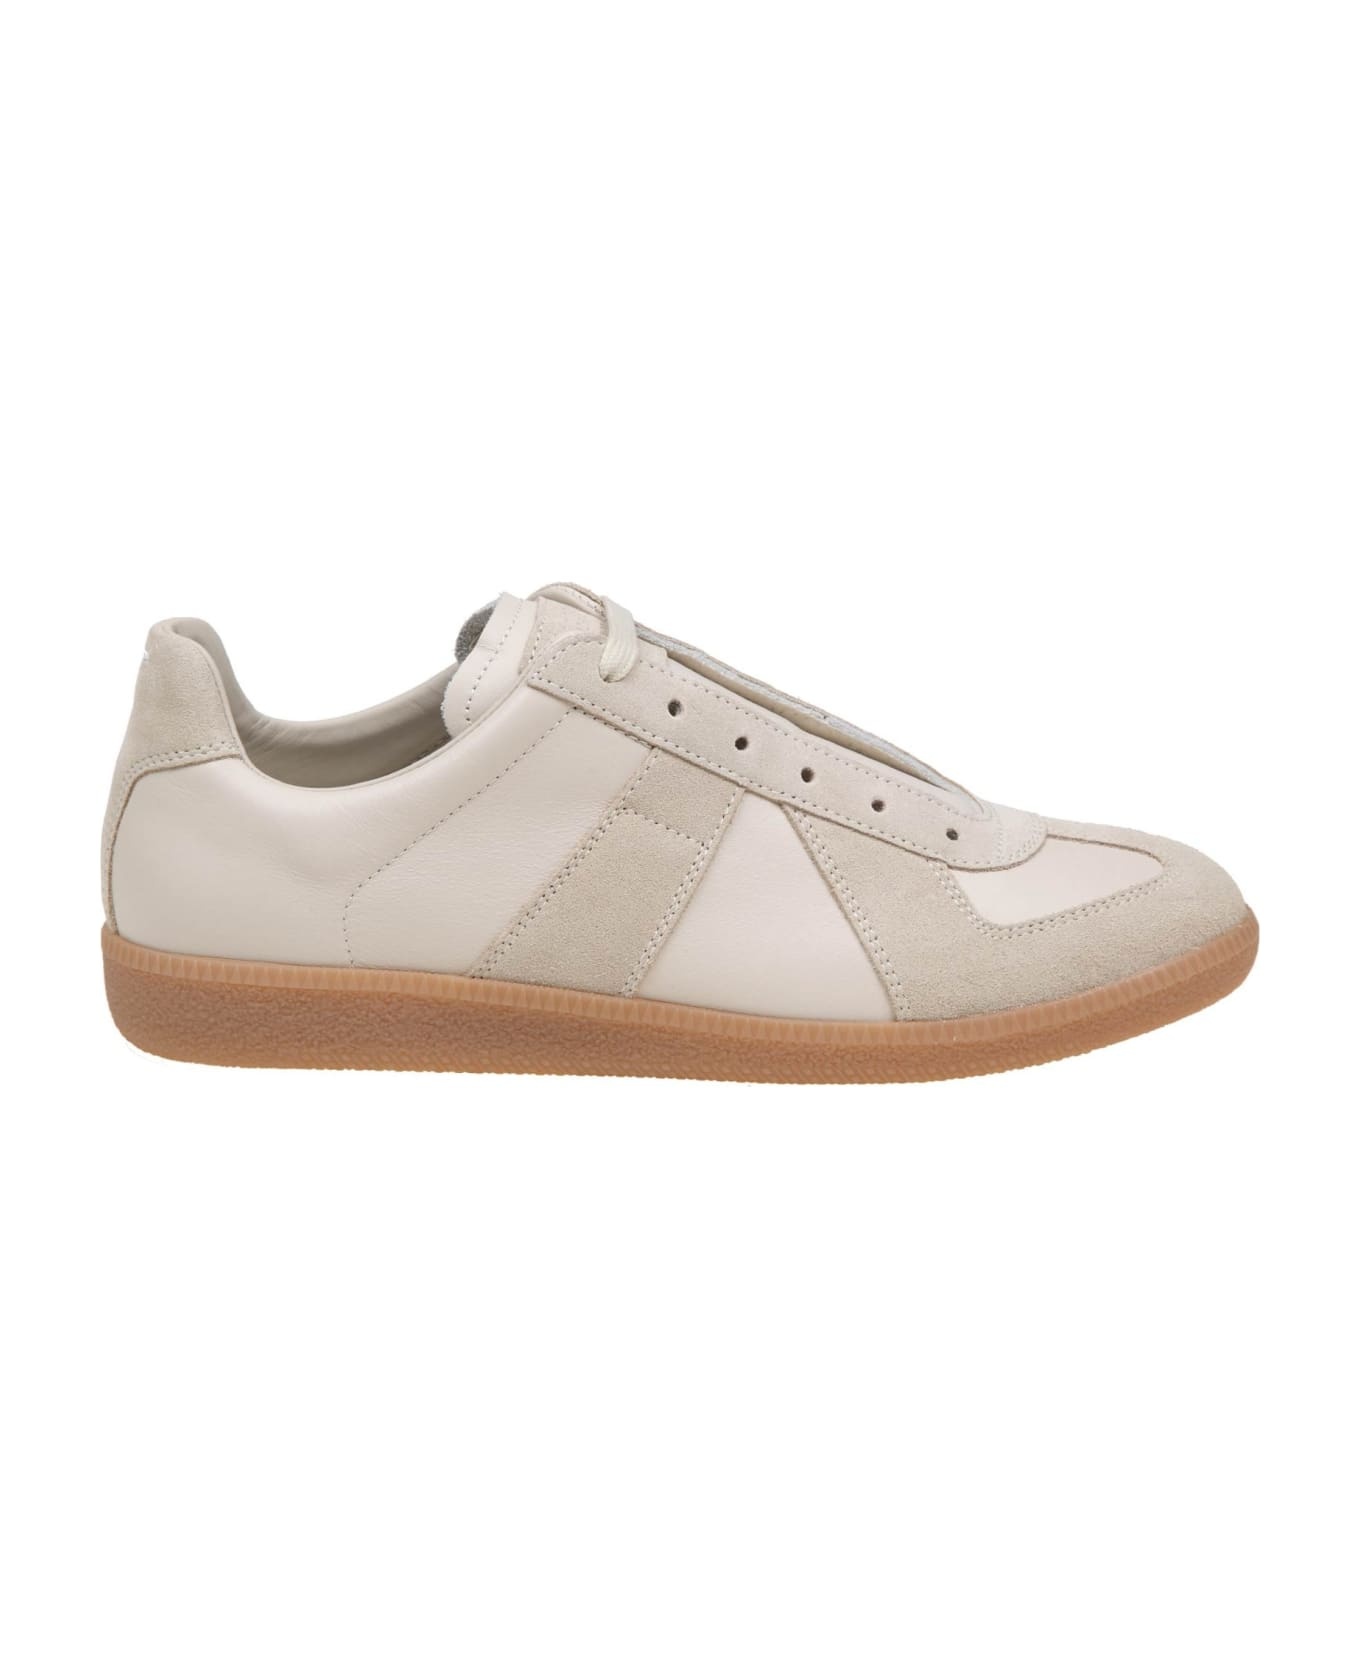 Replica Sneakers In Leather And Suede - 1